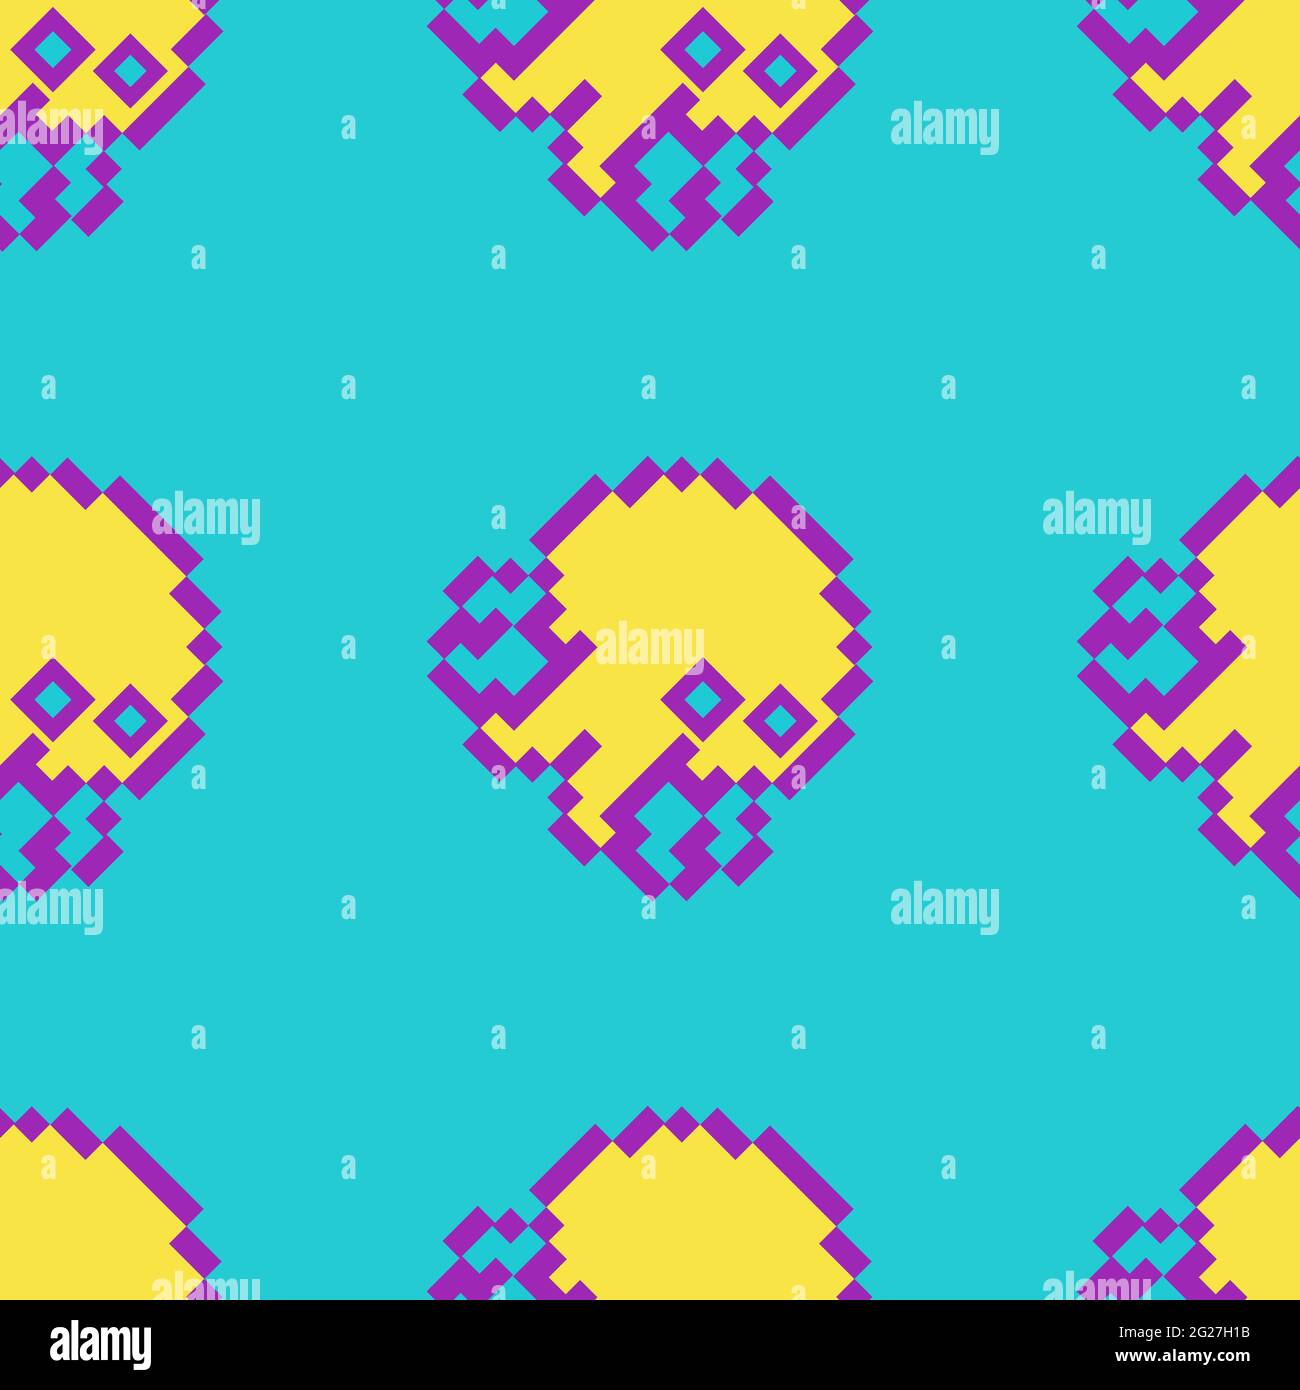 8-bit seamless pattern with jellyfishes. Bright pixel art retro ornament for textile design, stationery, wrapper paper, print Stock Vector